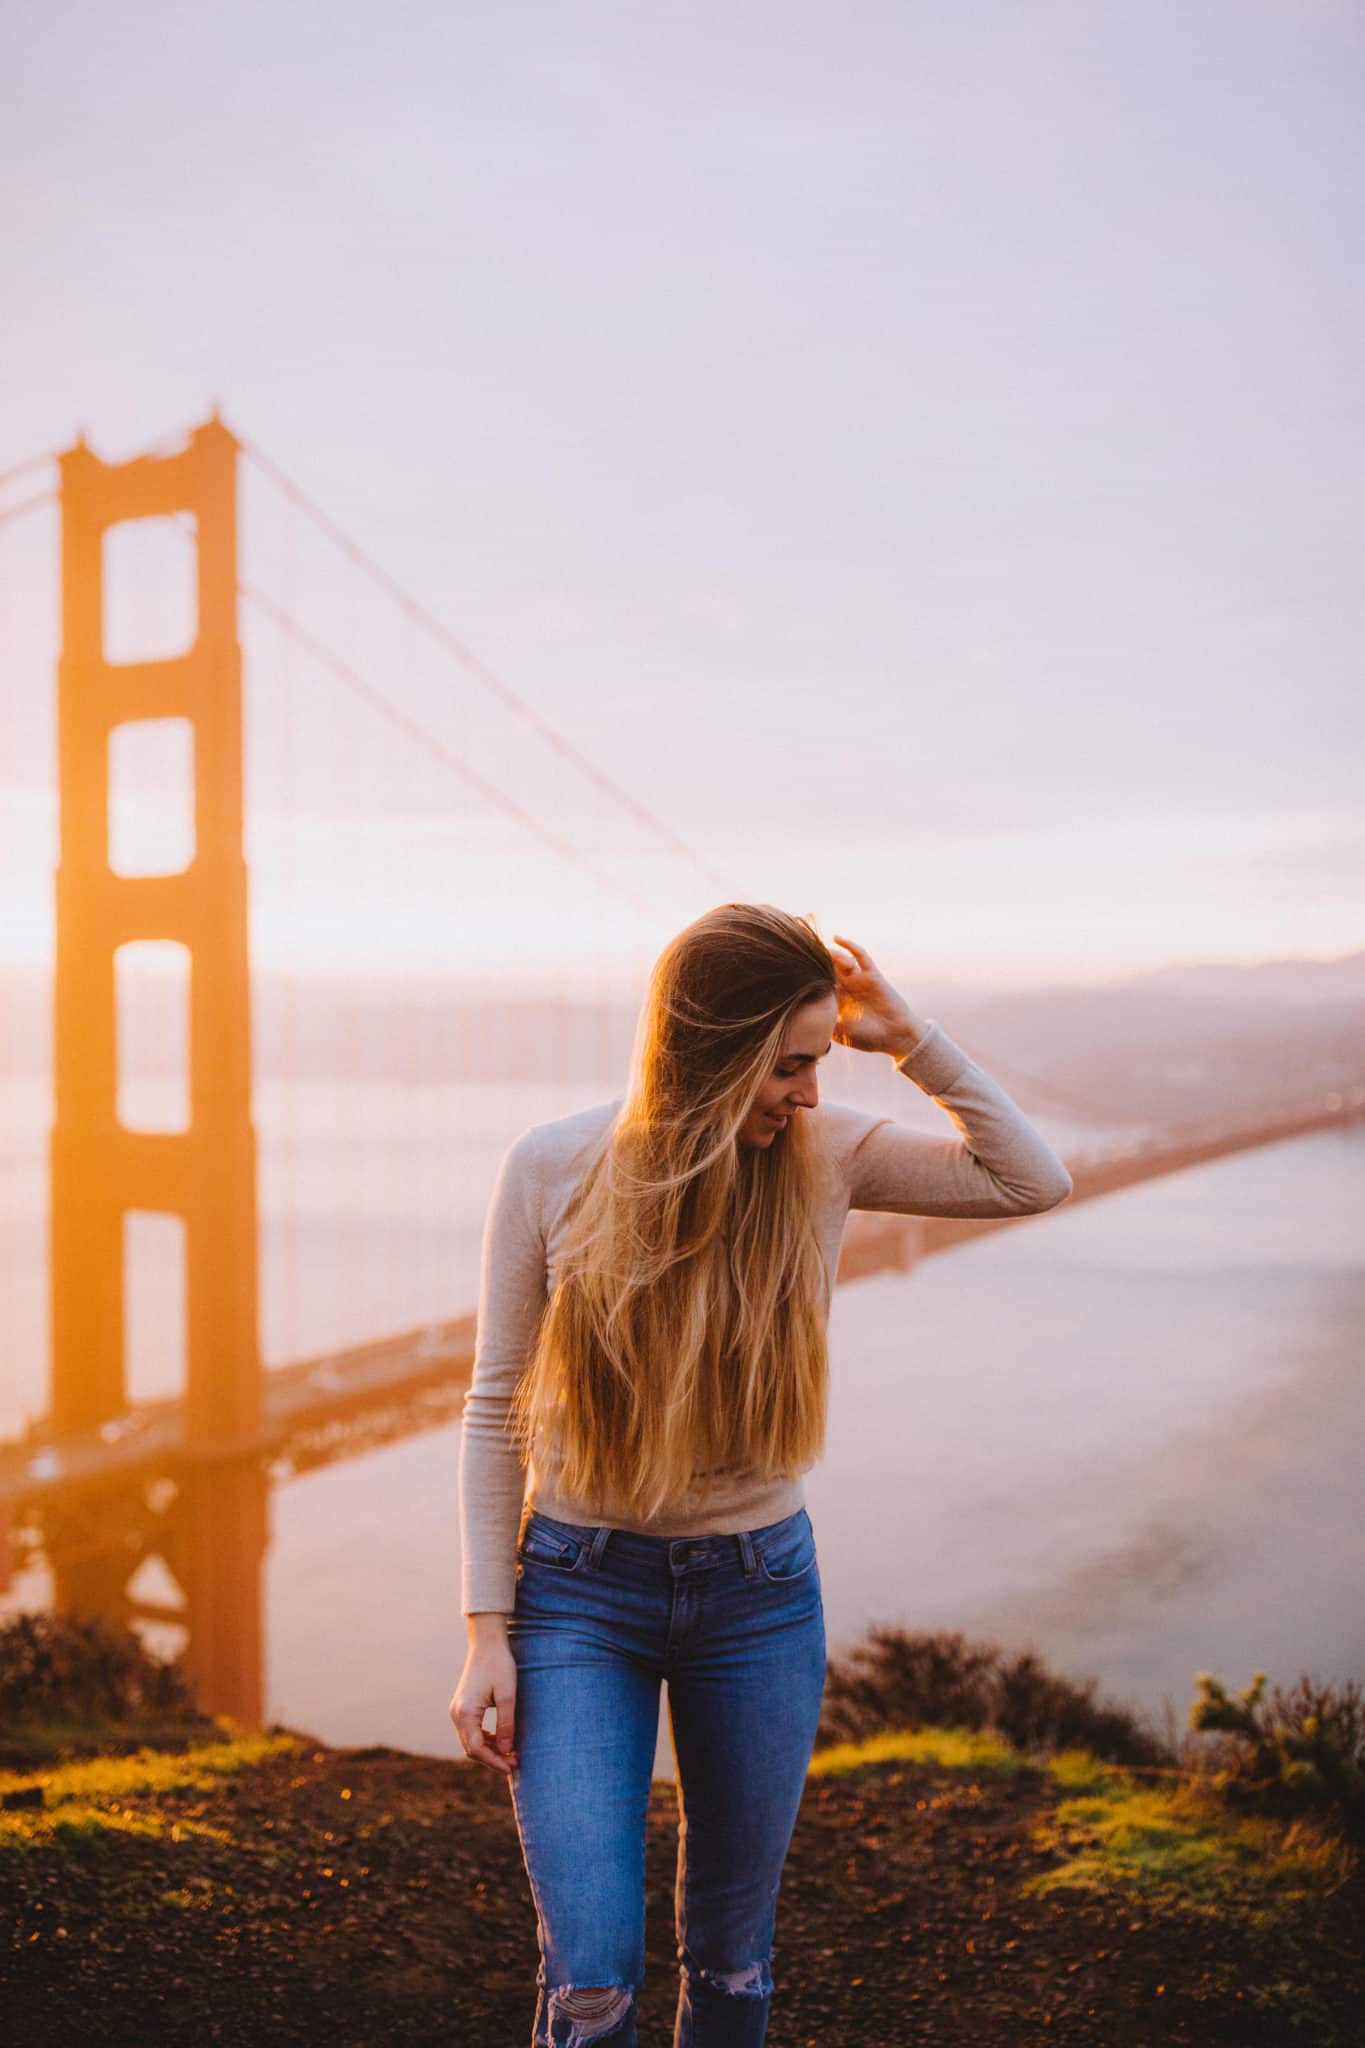 Emily at The Golden Gate Bridge - Travel Photography Tips